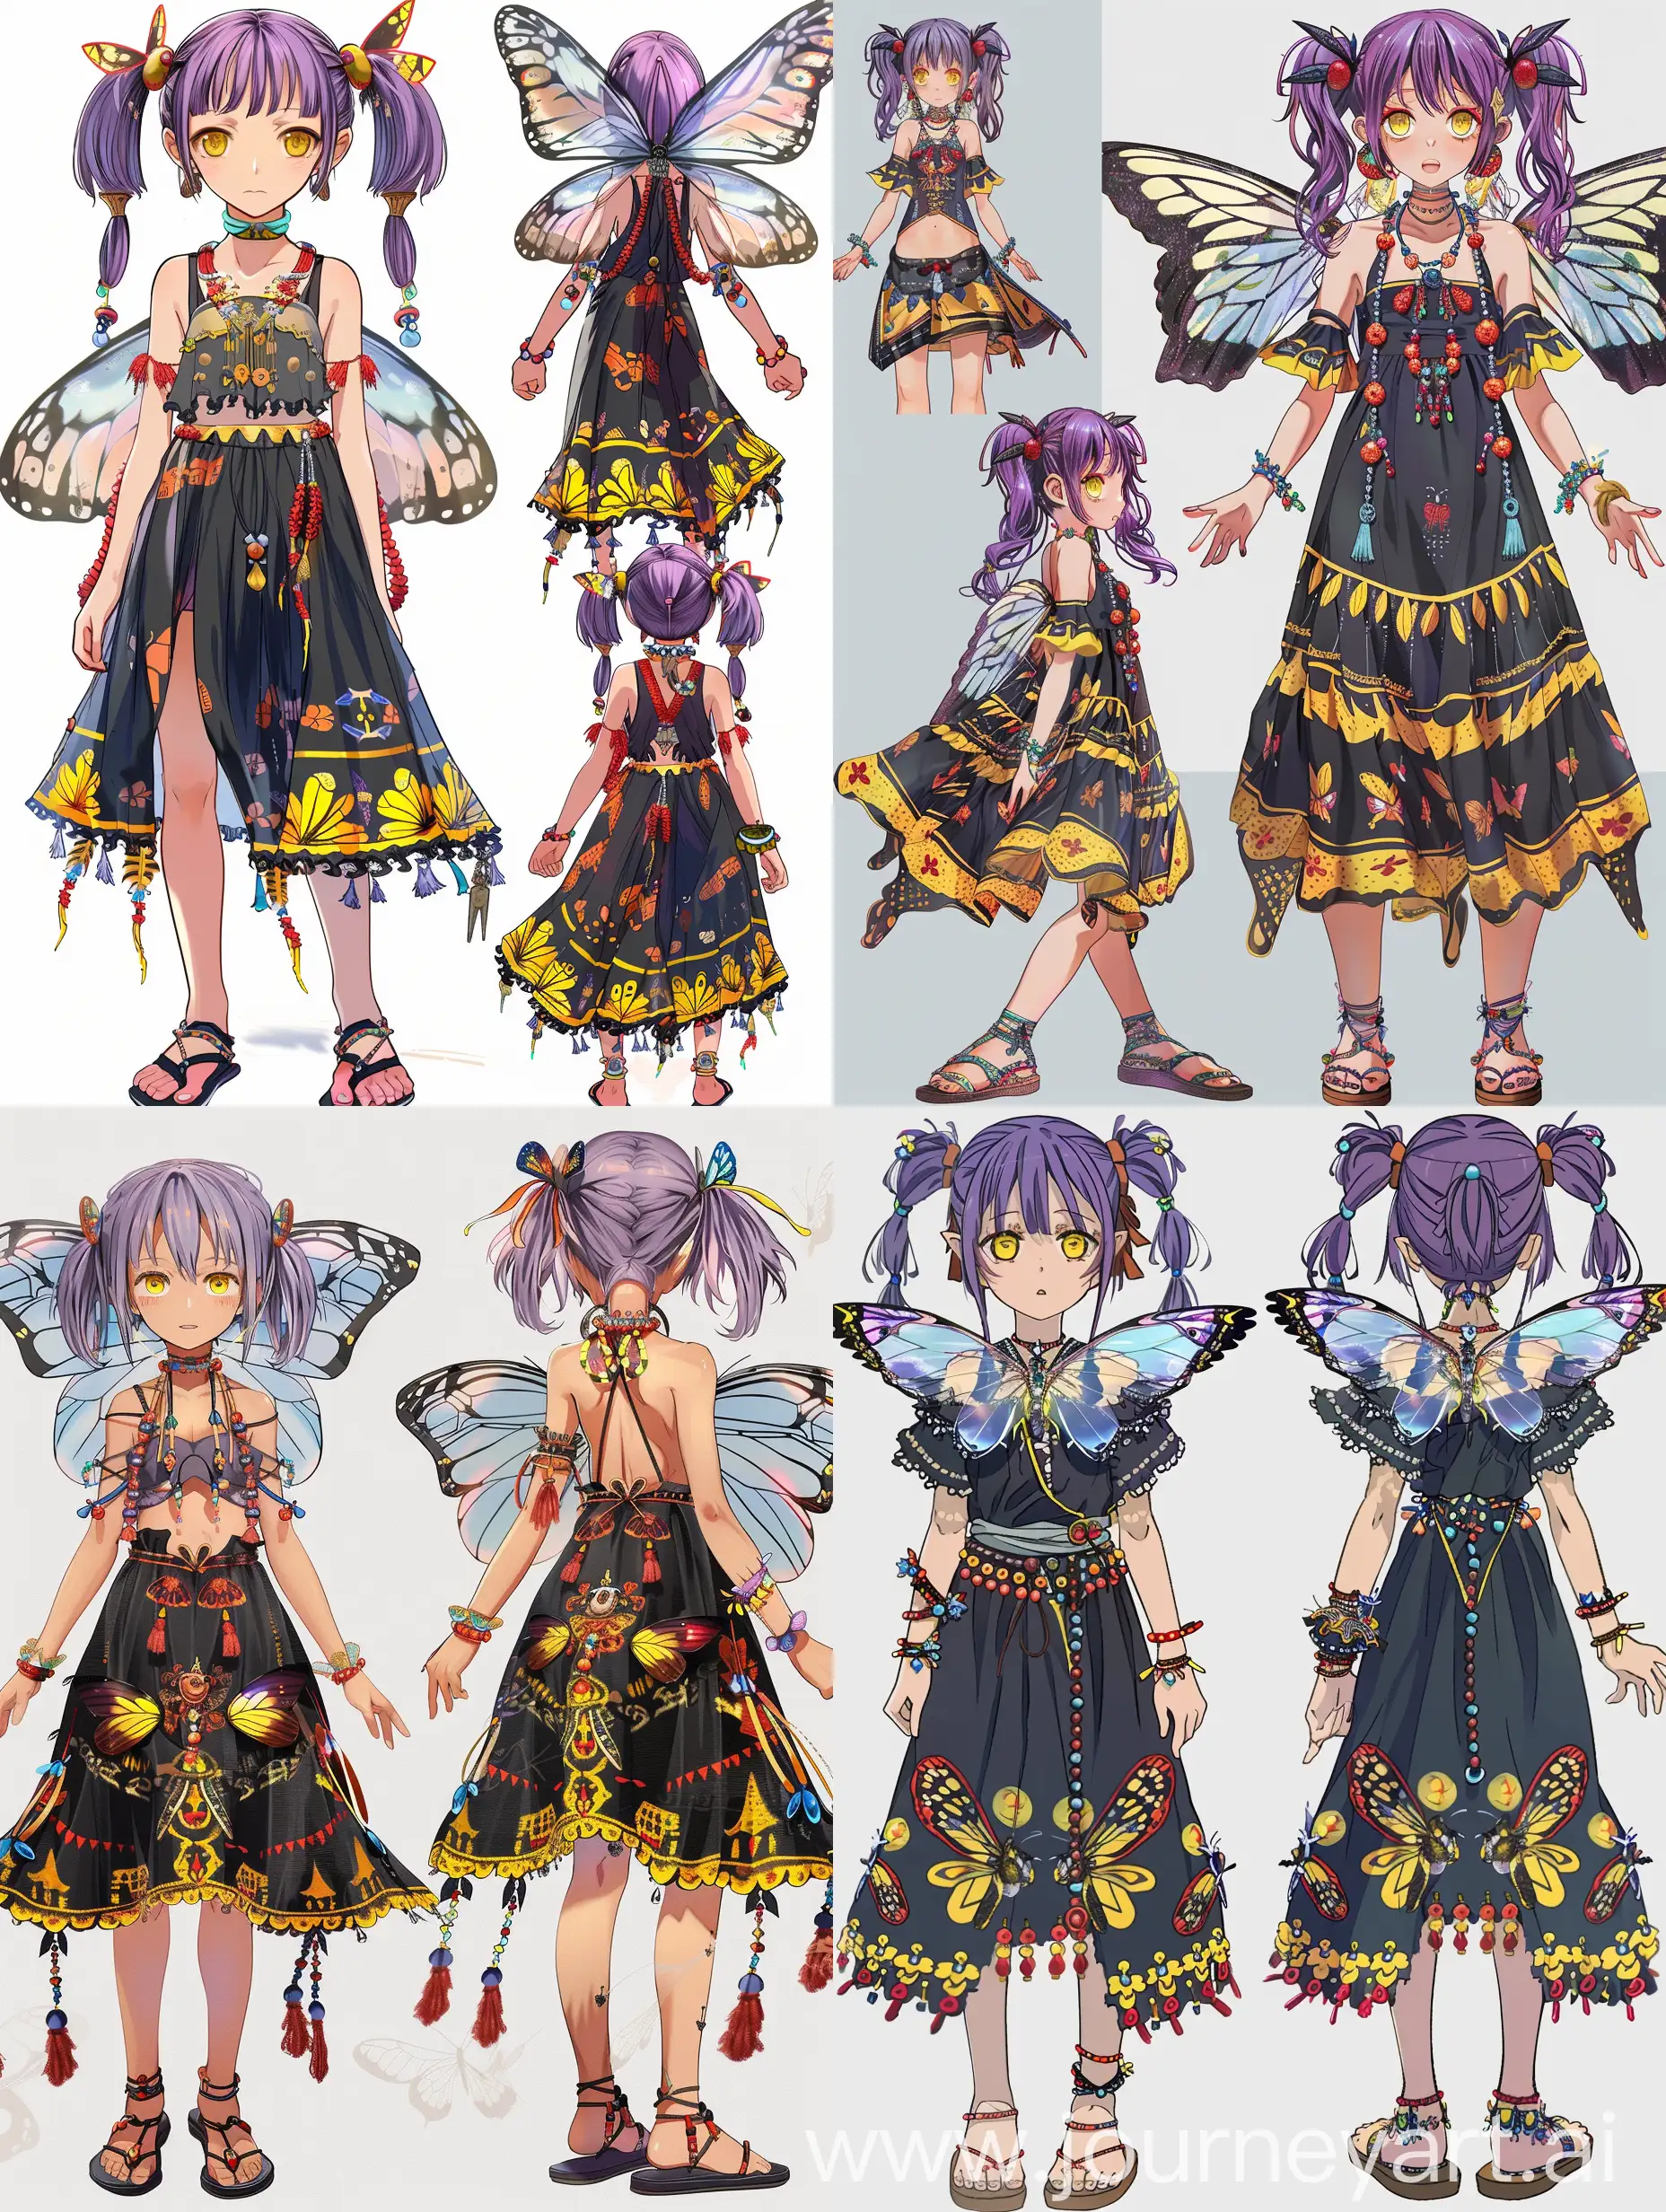 girl, multiple views, anime, standing at full height, with purple hair in pigtails, yellow eyes, translucent butterfly wings, black gypsy dress with yellow patterns, red and blue beads on her neck and arms, sandals.